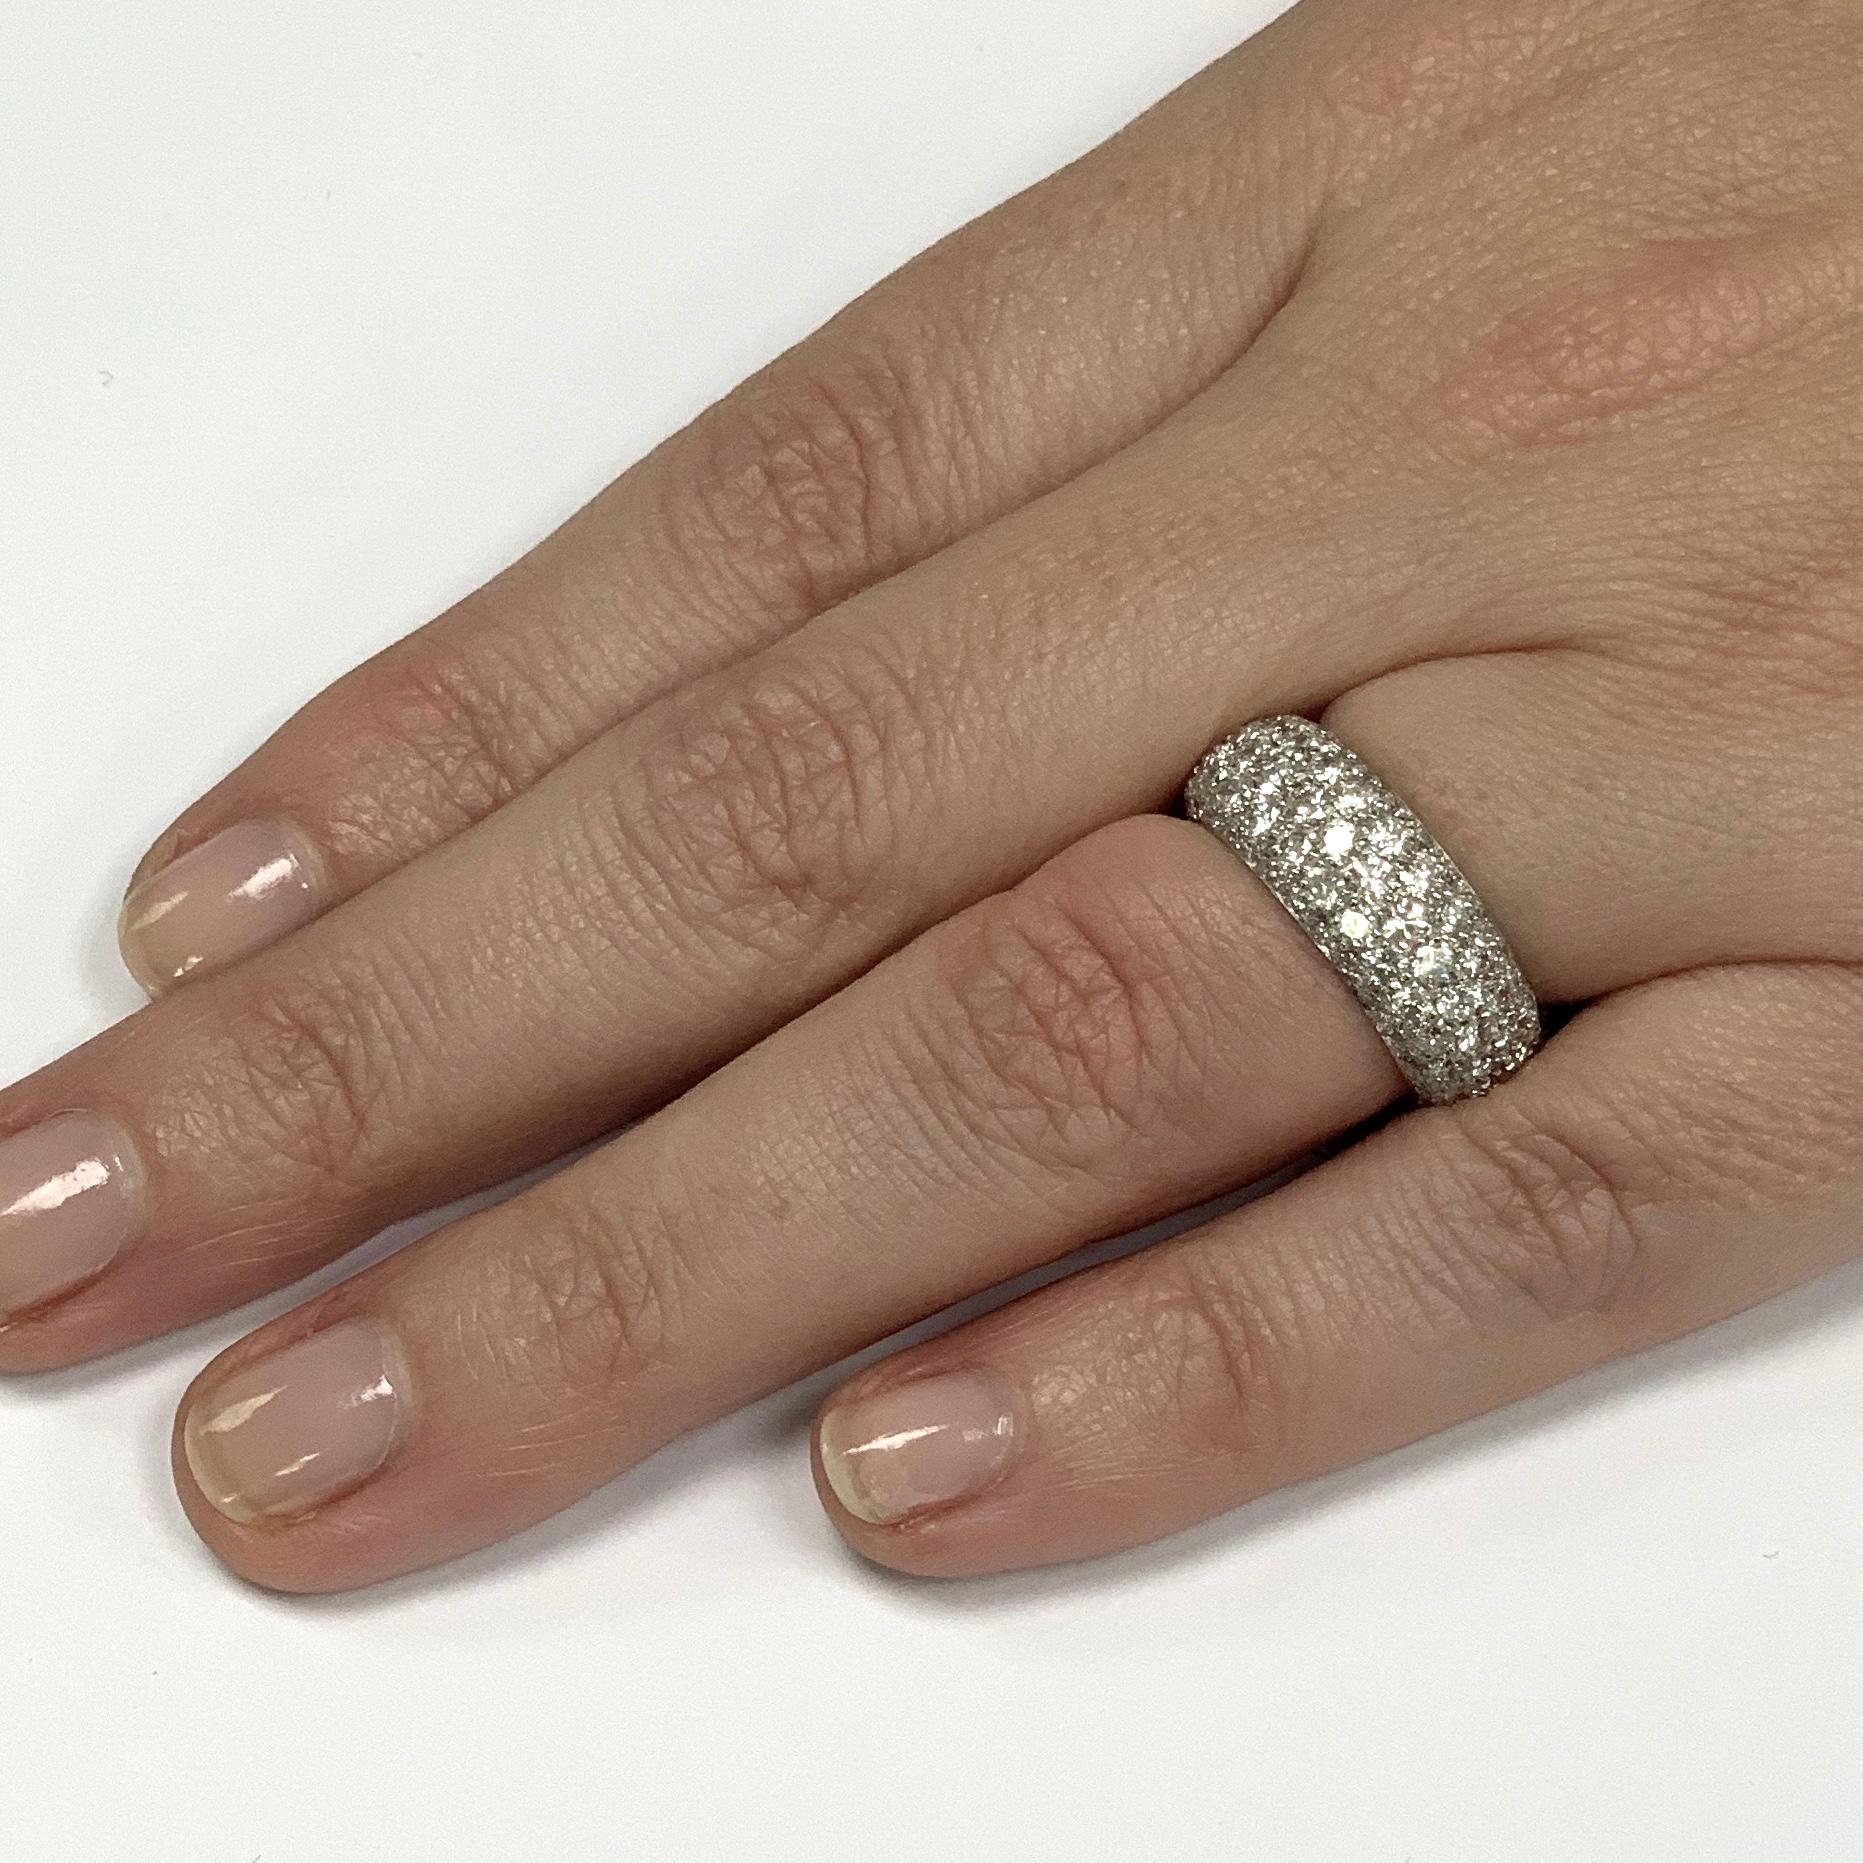 4.30ct total weight of brilliant dazzling G color SI clarity diamonds! This 5 row stunner is set in Platinum, 7.5 mm and a size 6. If you don't see something, say something! We would be happy to work with you to create your dream ring!